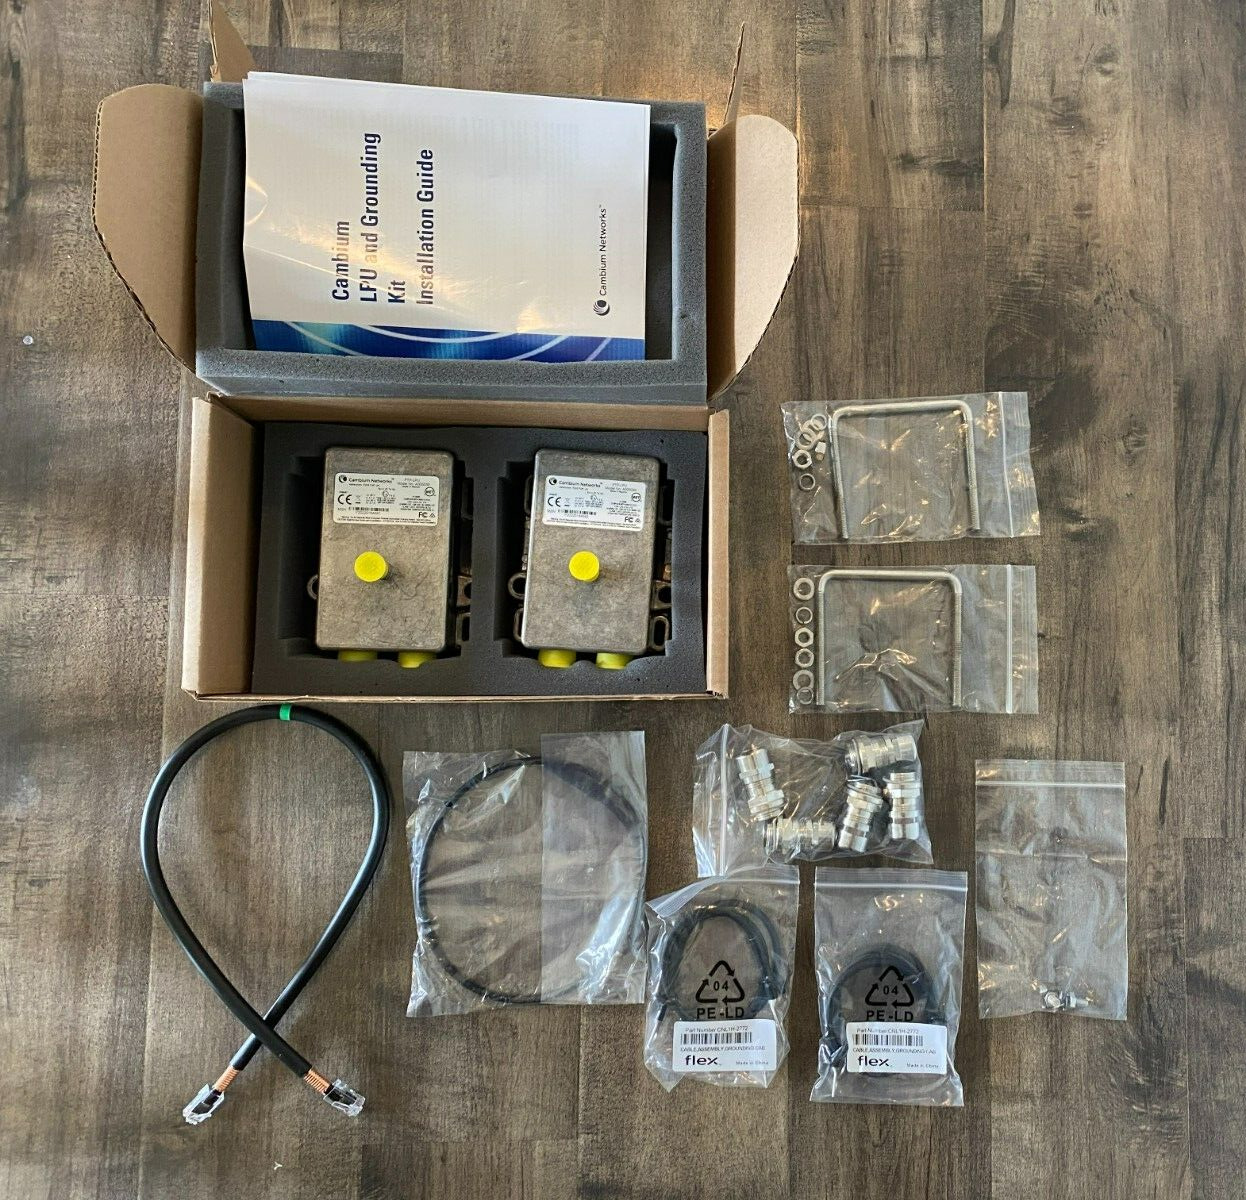 Cambium Networks C000065L007B PTP650/670/700 LPU and Grounding Kit Model A005030